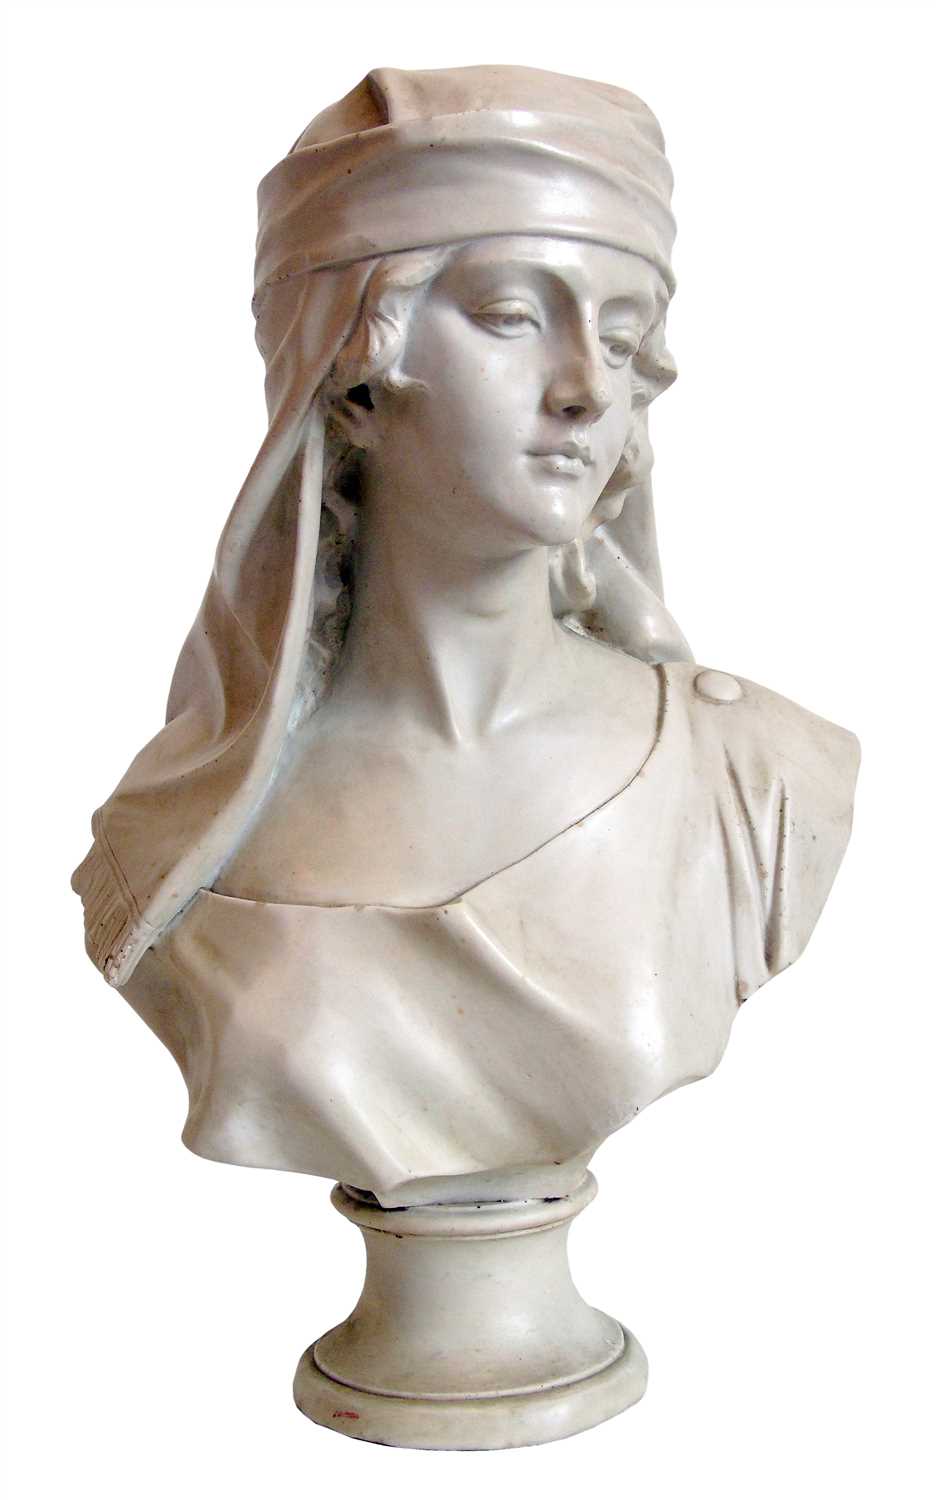 Lot 284 - 20th century reconstituted white marble bust of a Woman with headscarf, height 56cm (22").